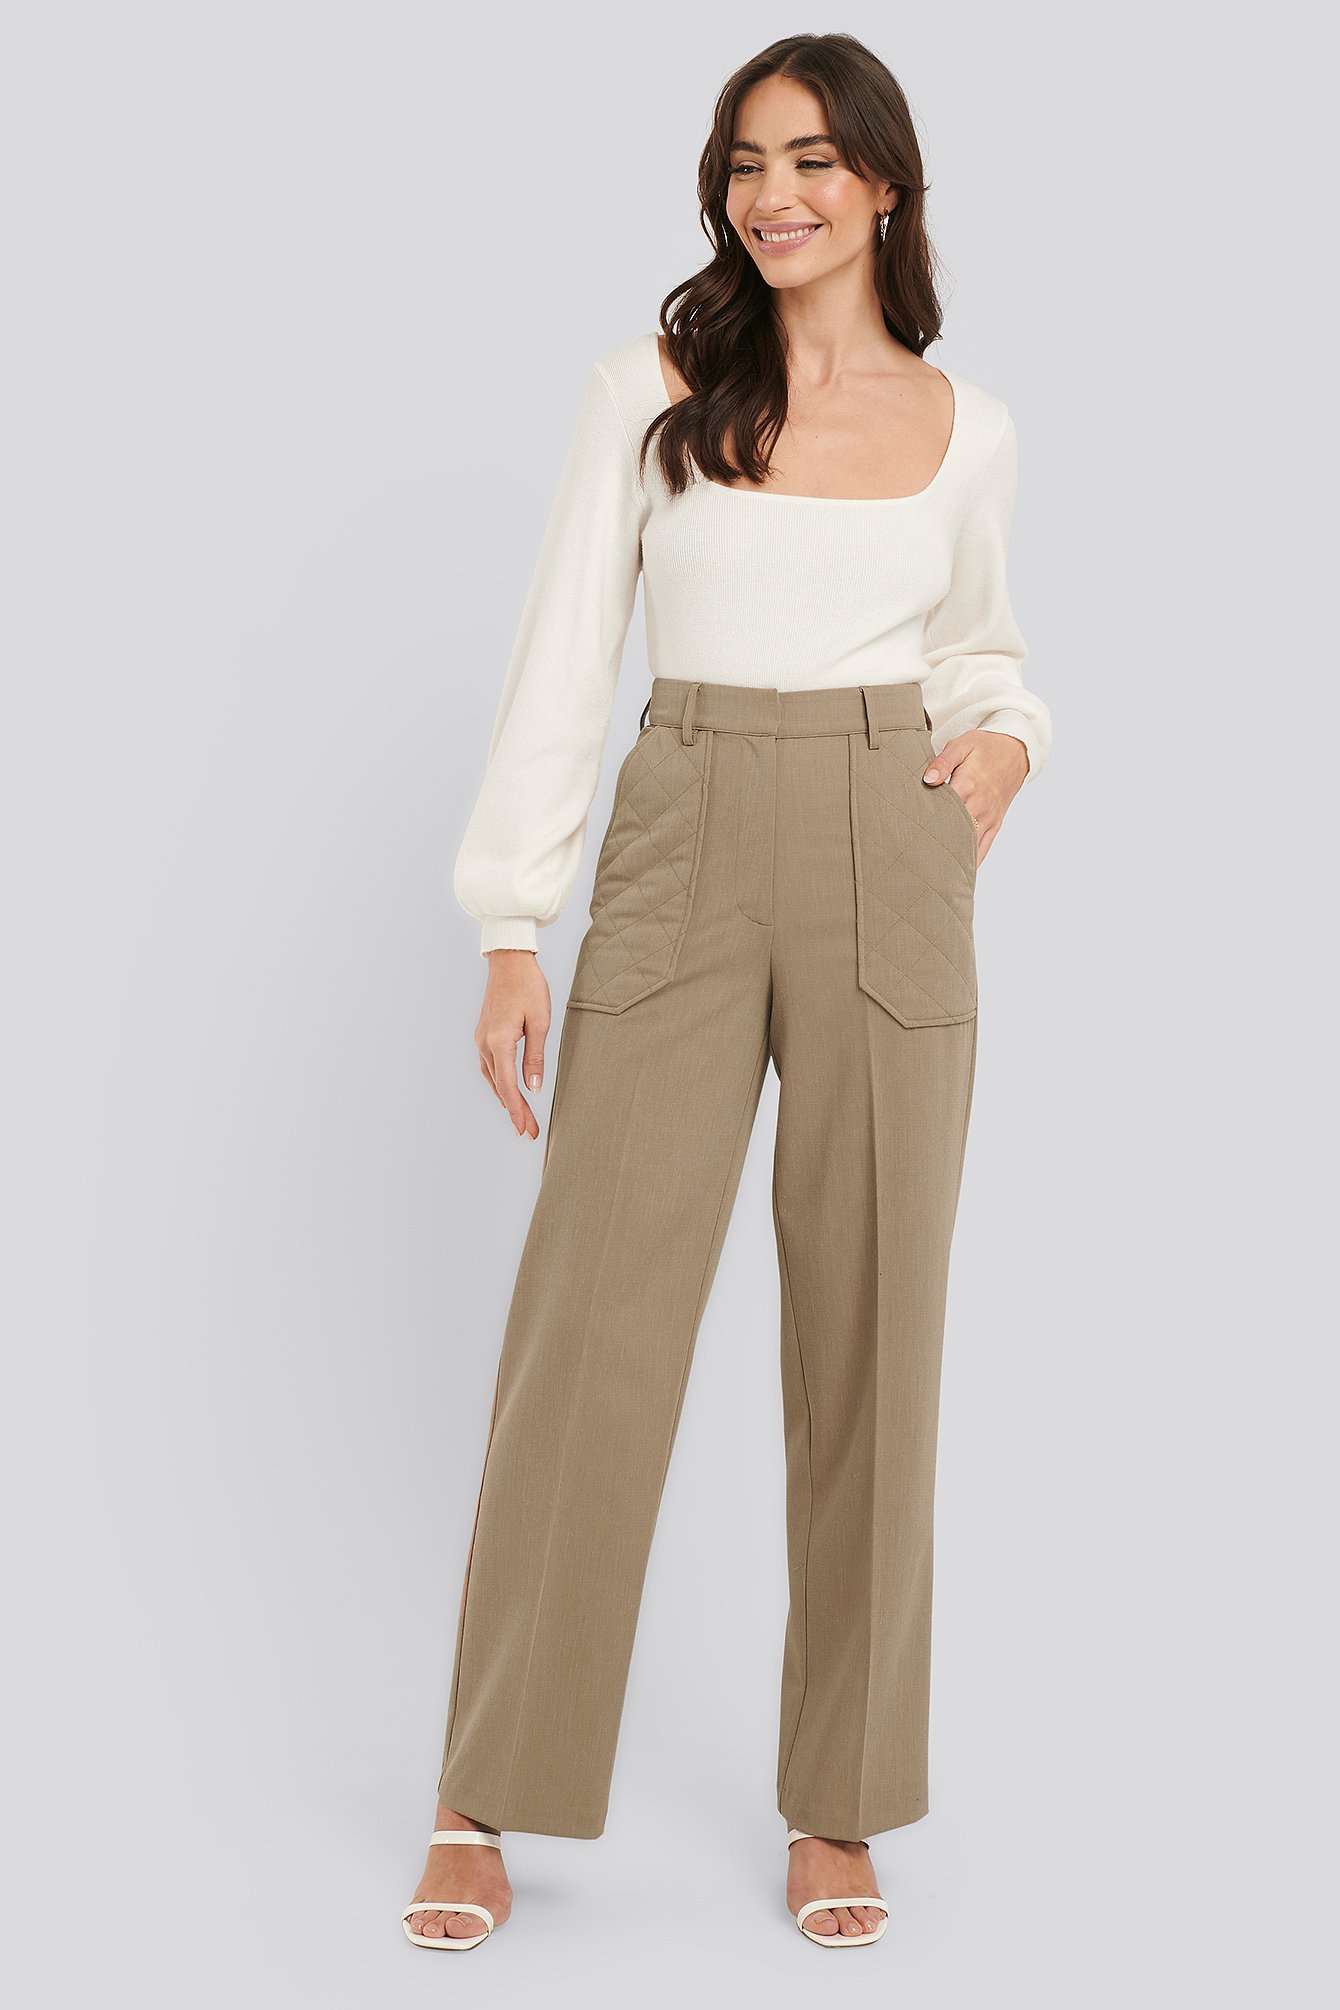 Quilted Pocket Suit Pants Outfit